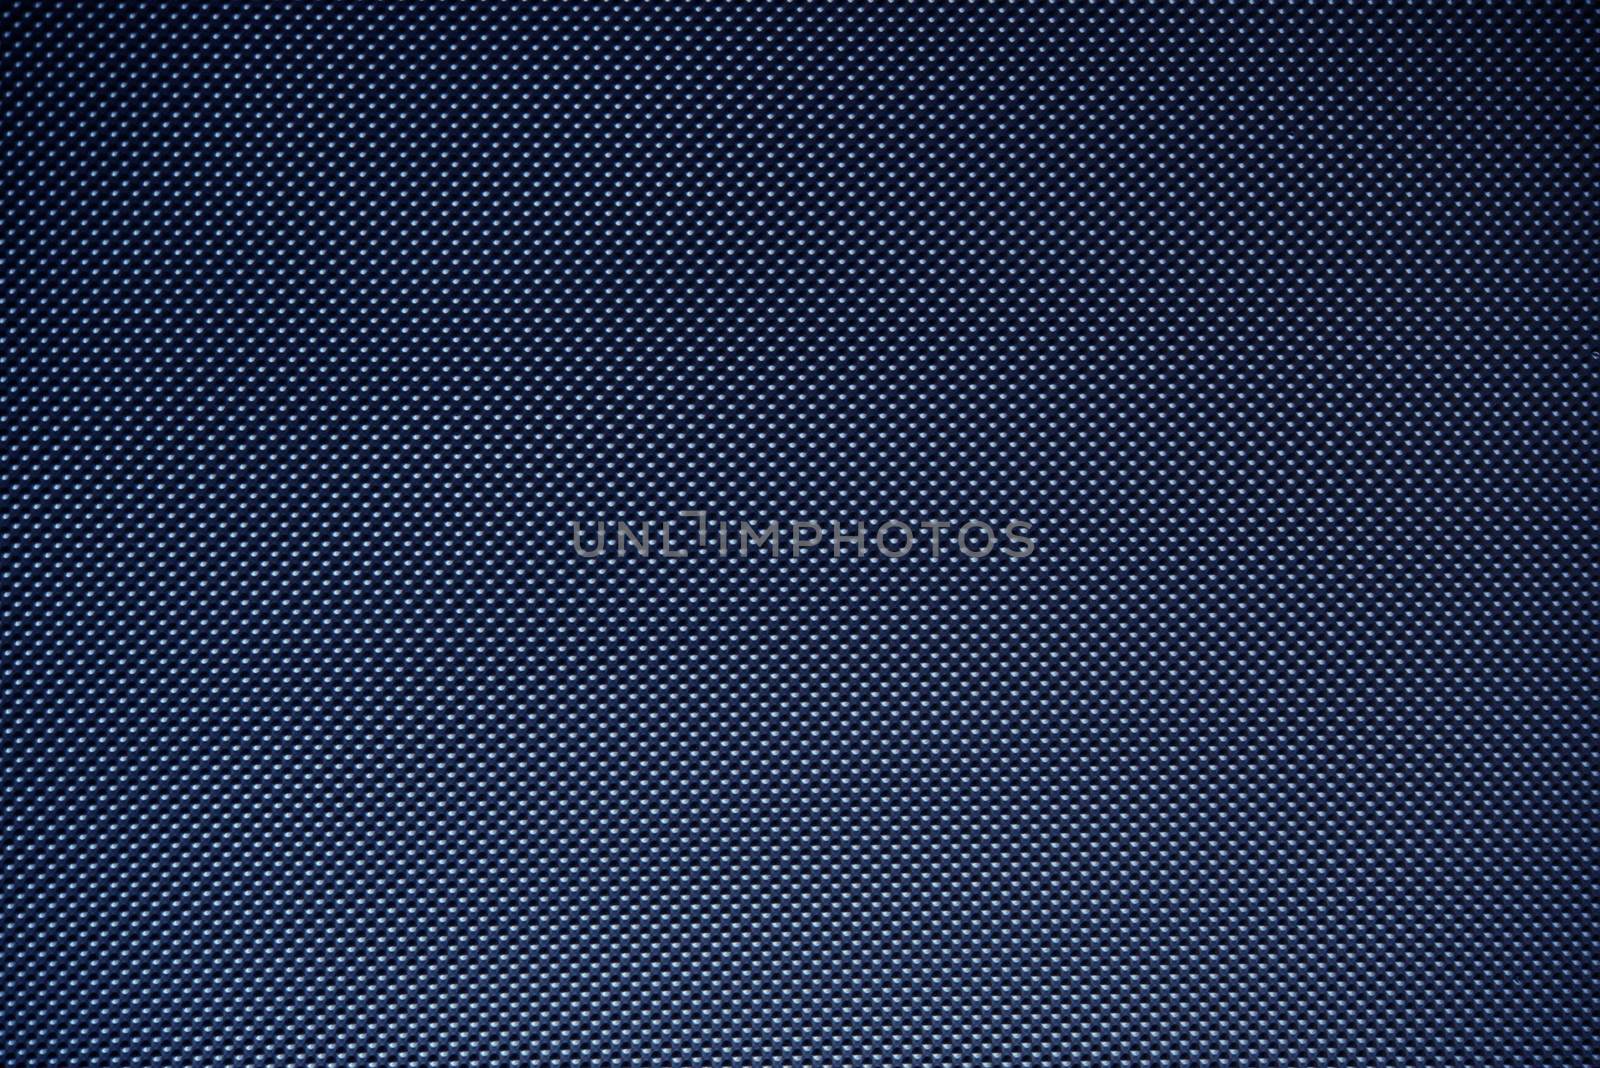 Dark Blue Abstract Carbon Pattern Photo Background.